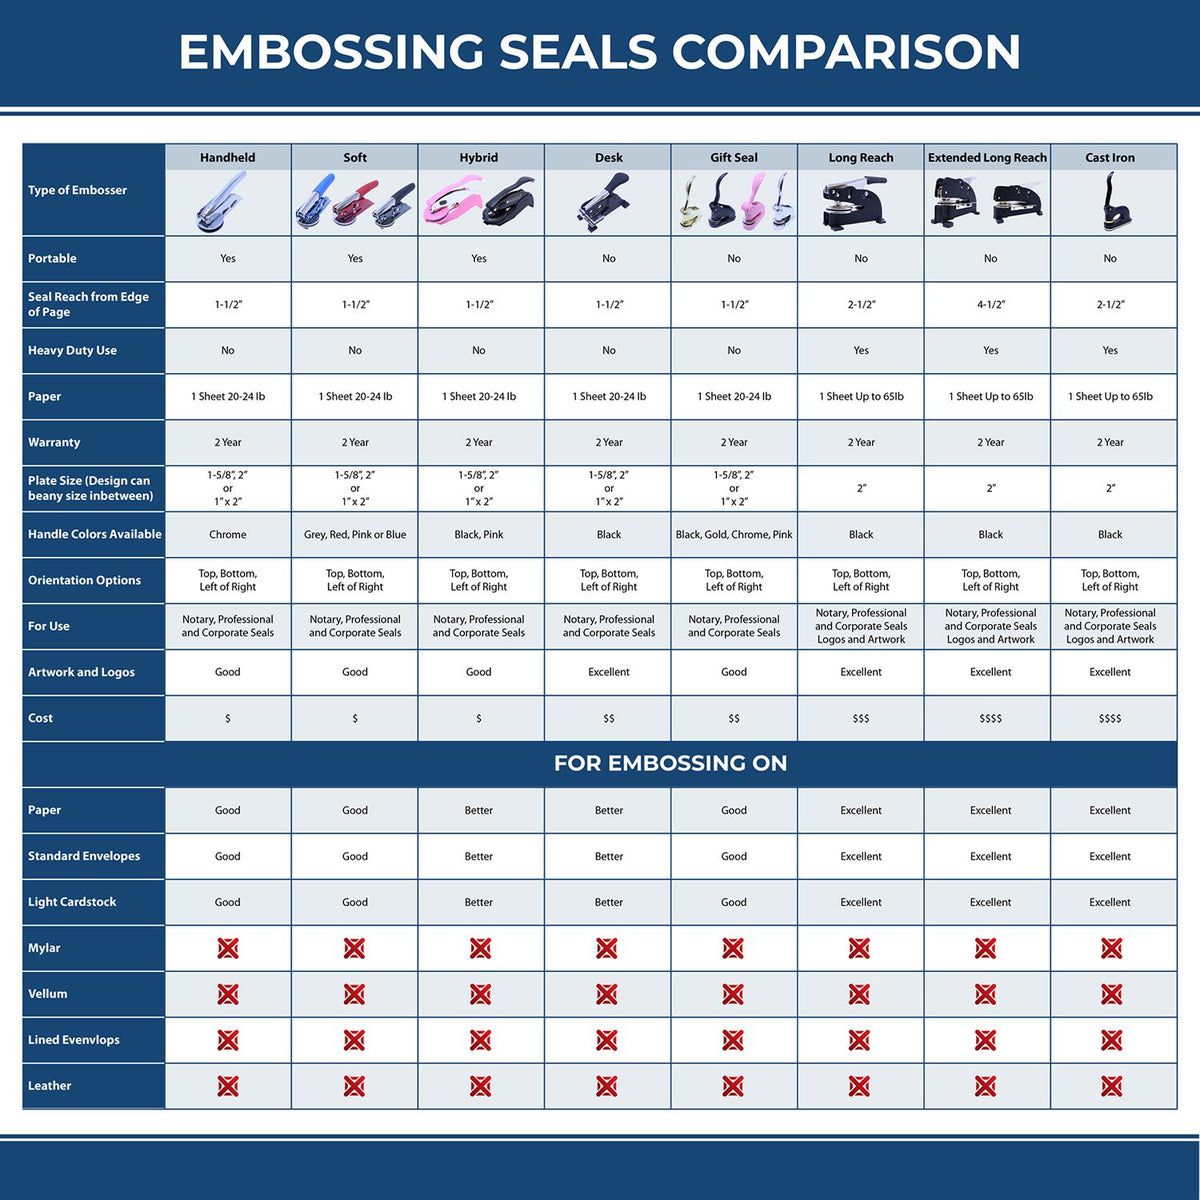 A comparison chart for the different types of mount models available for the Extended Long Reach Washington Architect Seal Embosser.